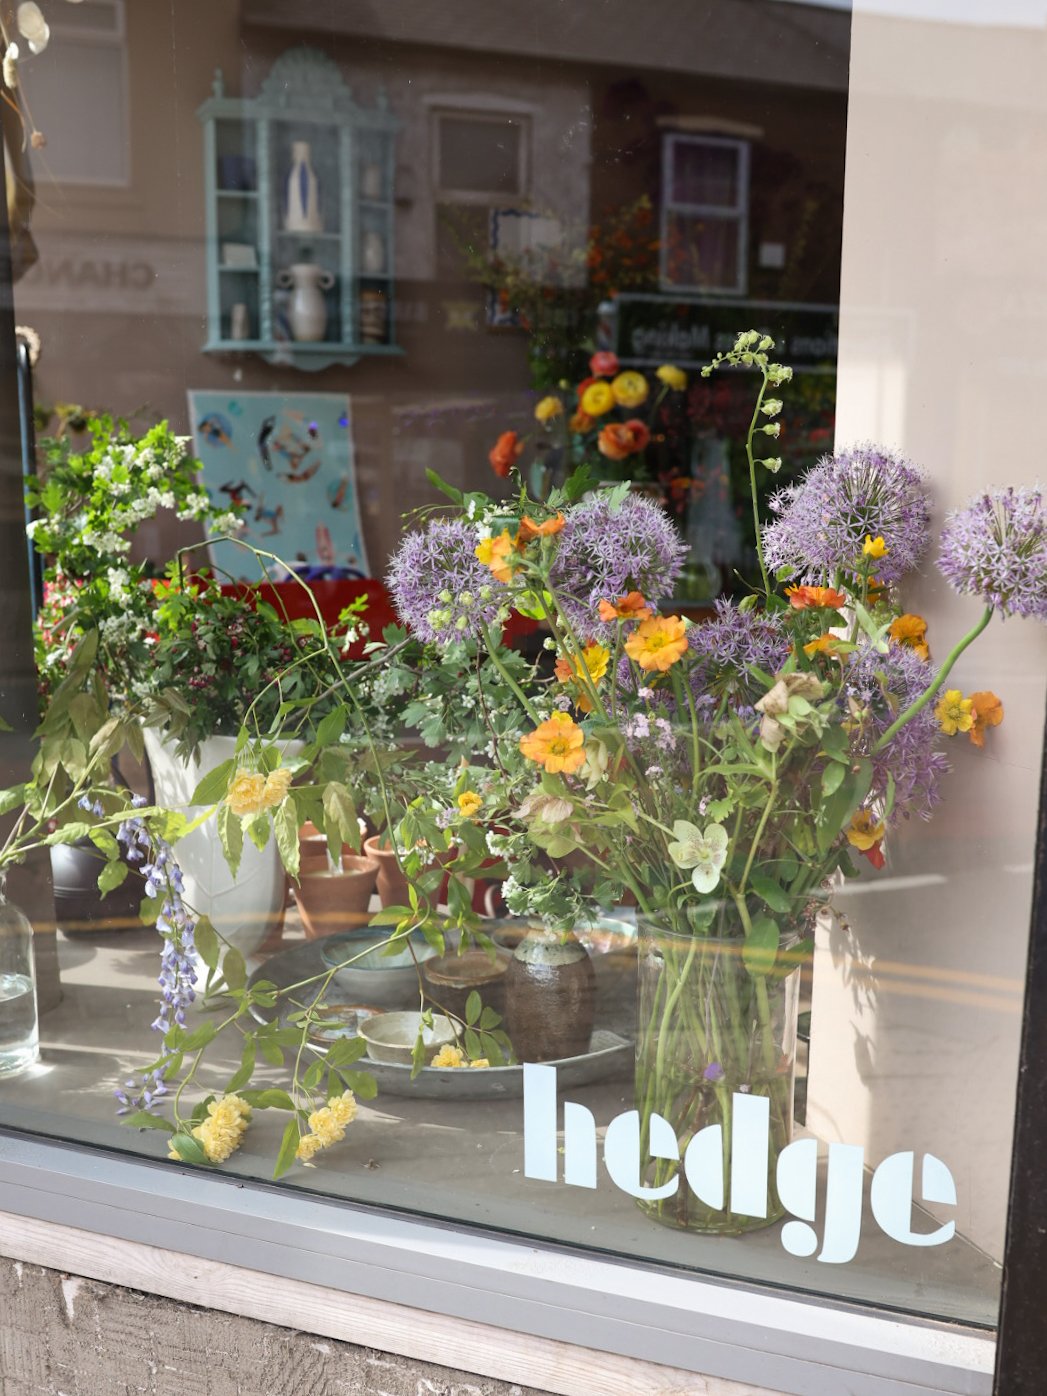 Hedge - Sustainable floristry and lifestyle store - Stirchley, Birmingham